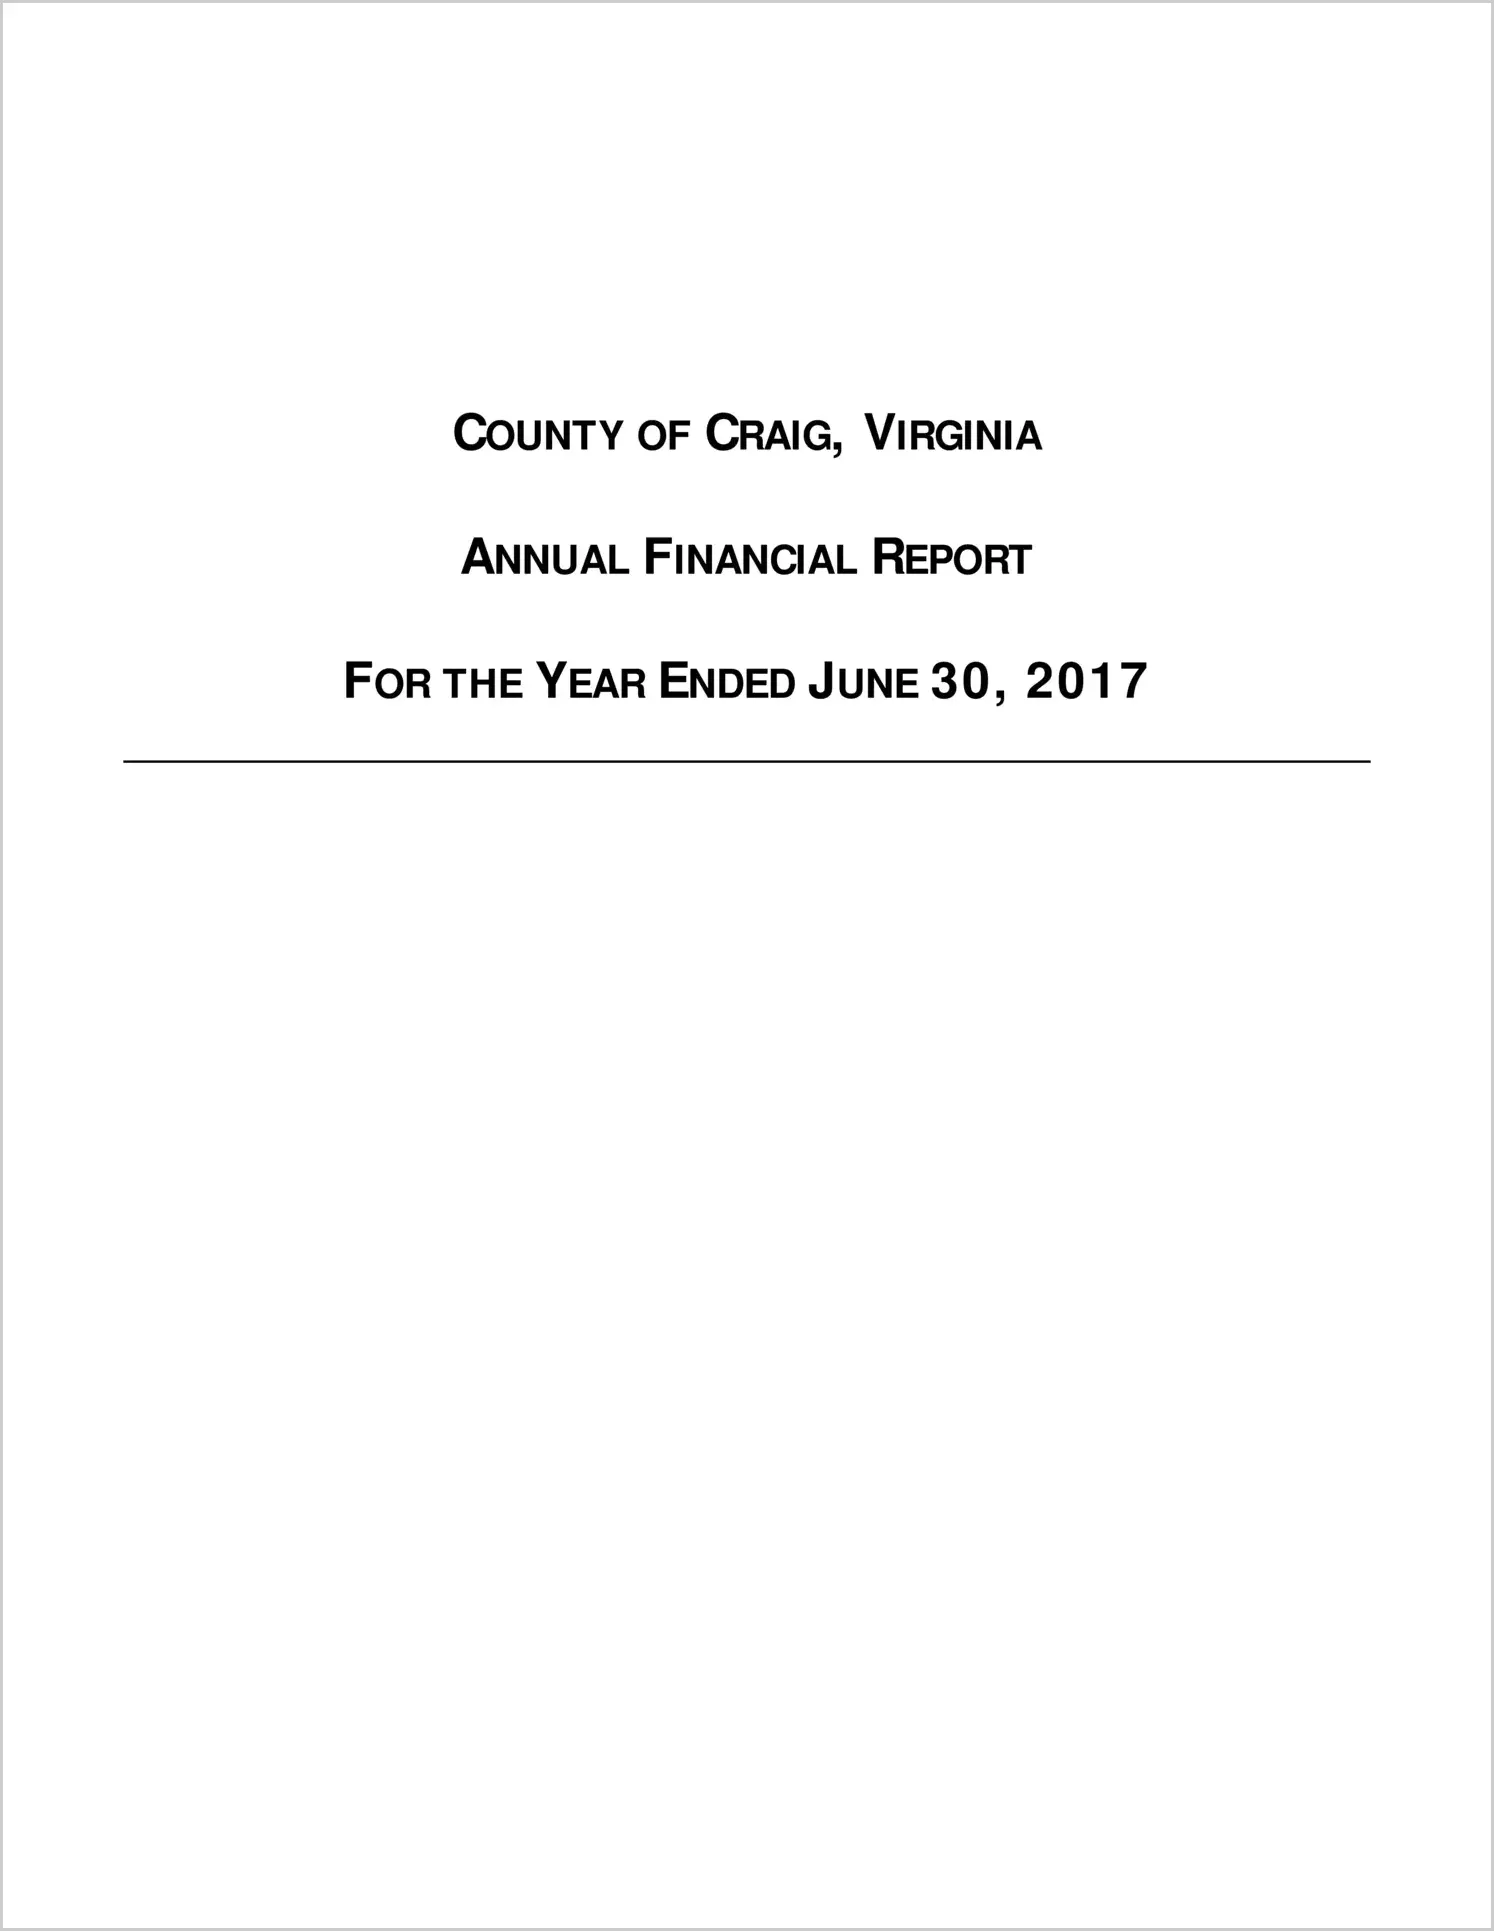 2017 Annual Financial Report for County of Craig